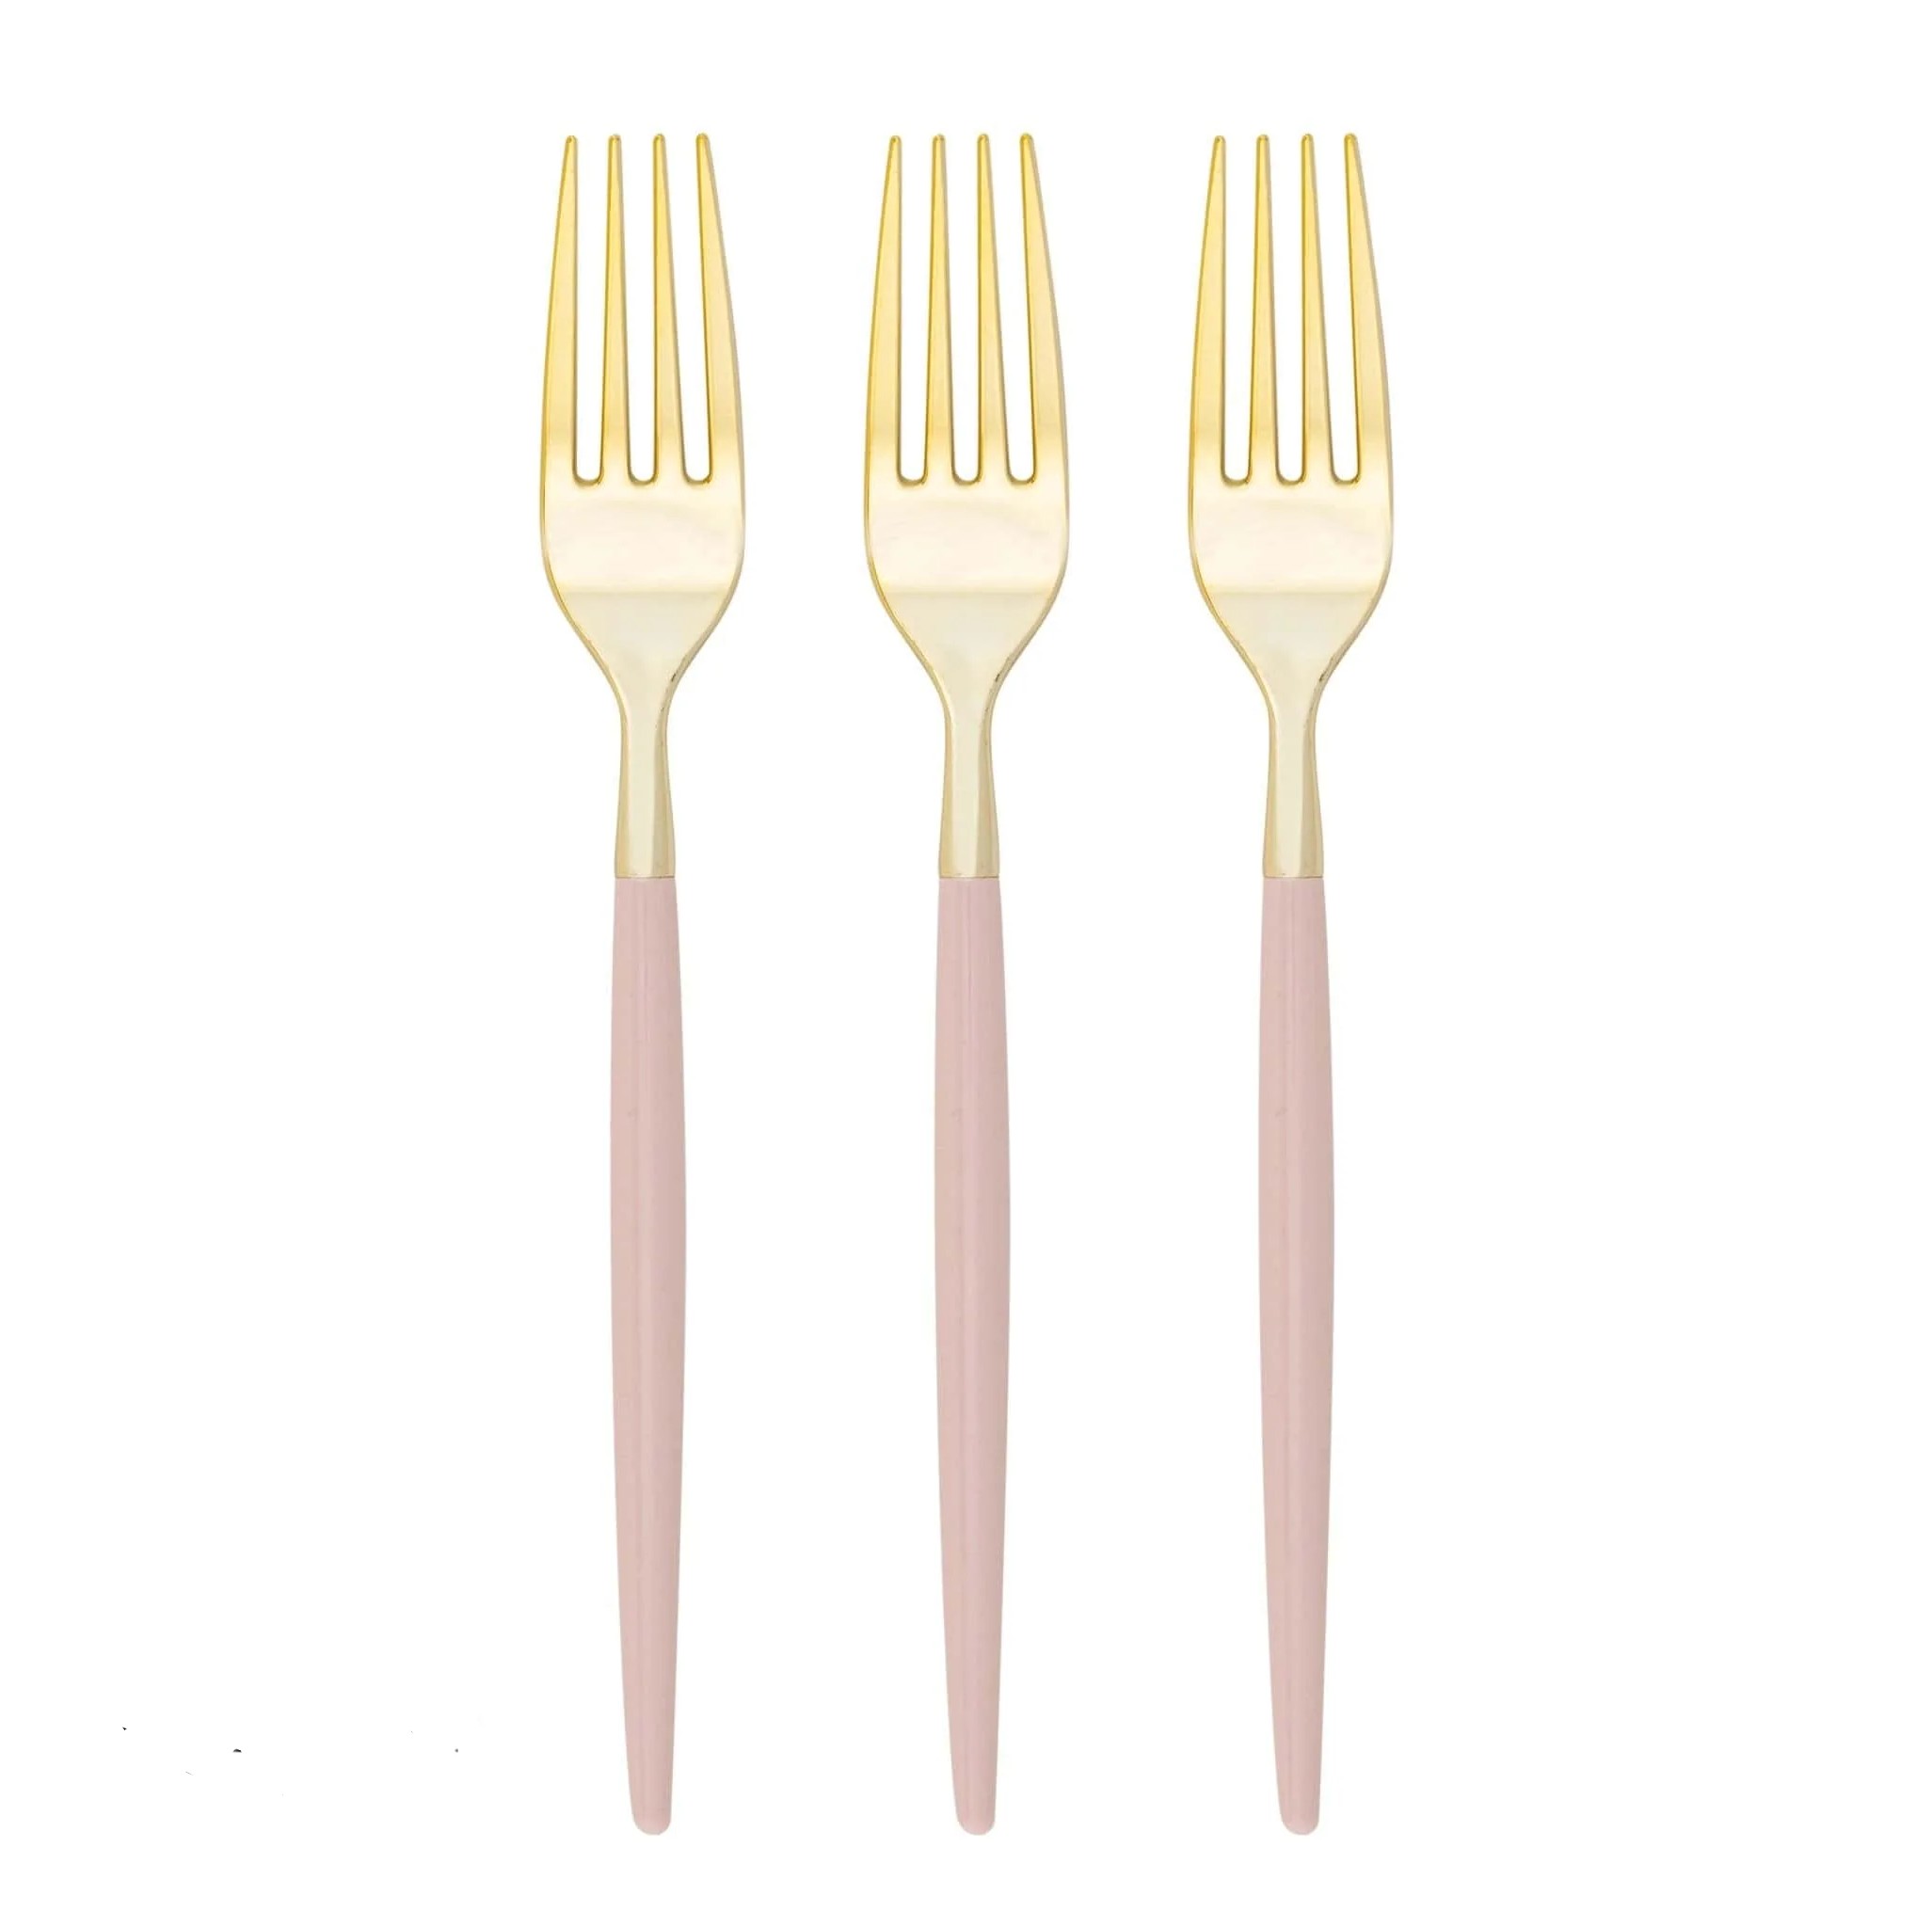 Luxe Party Chic Blush and Gold Two Tone Plastic Forks - 32 pcs